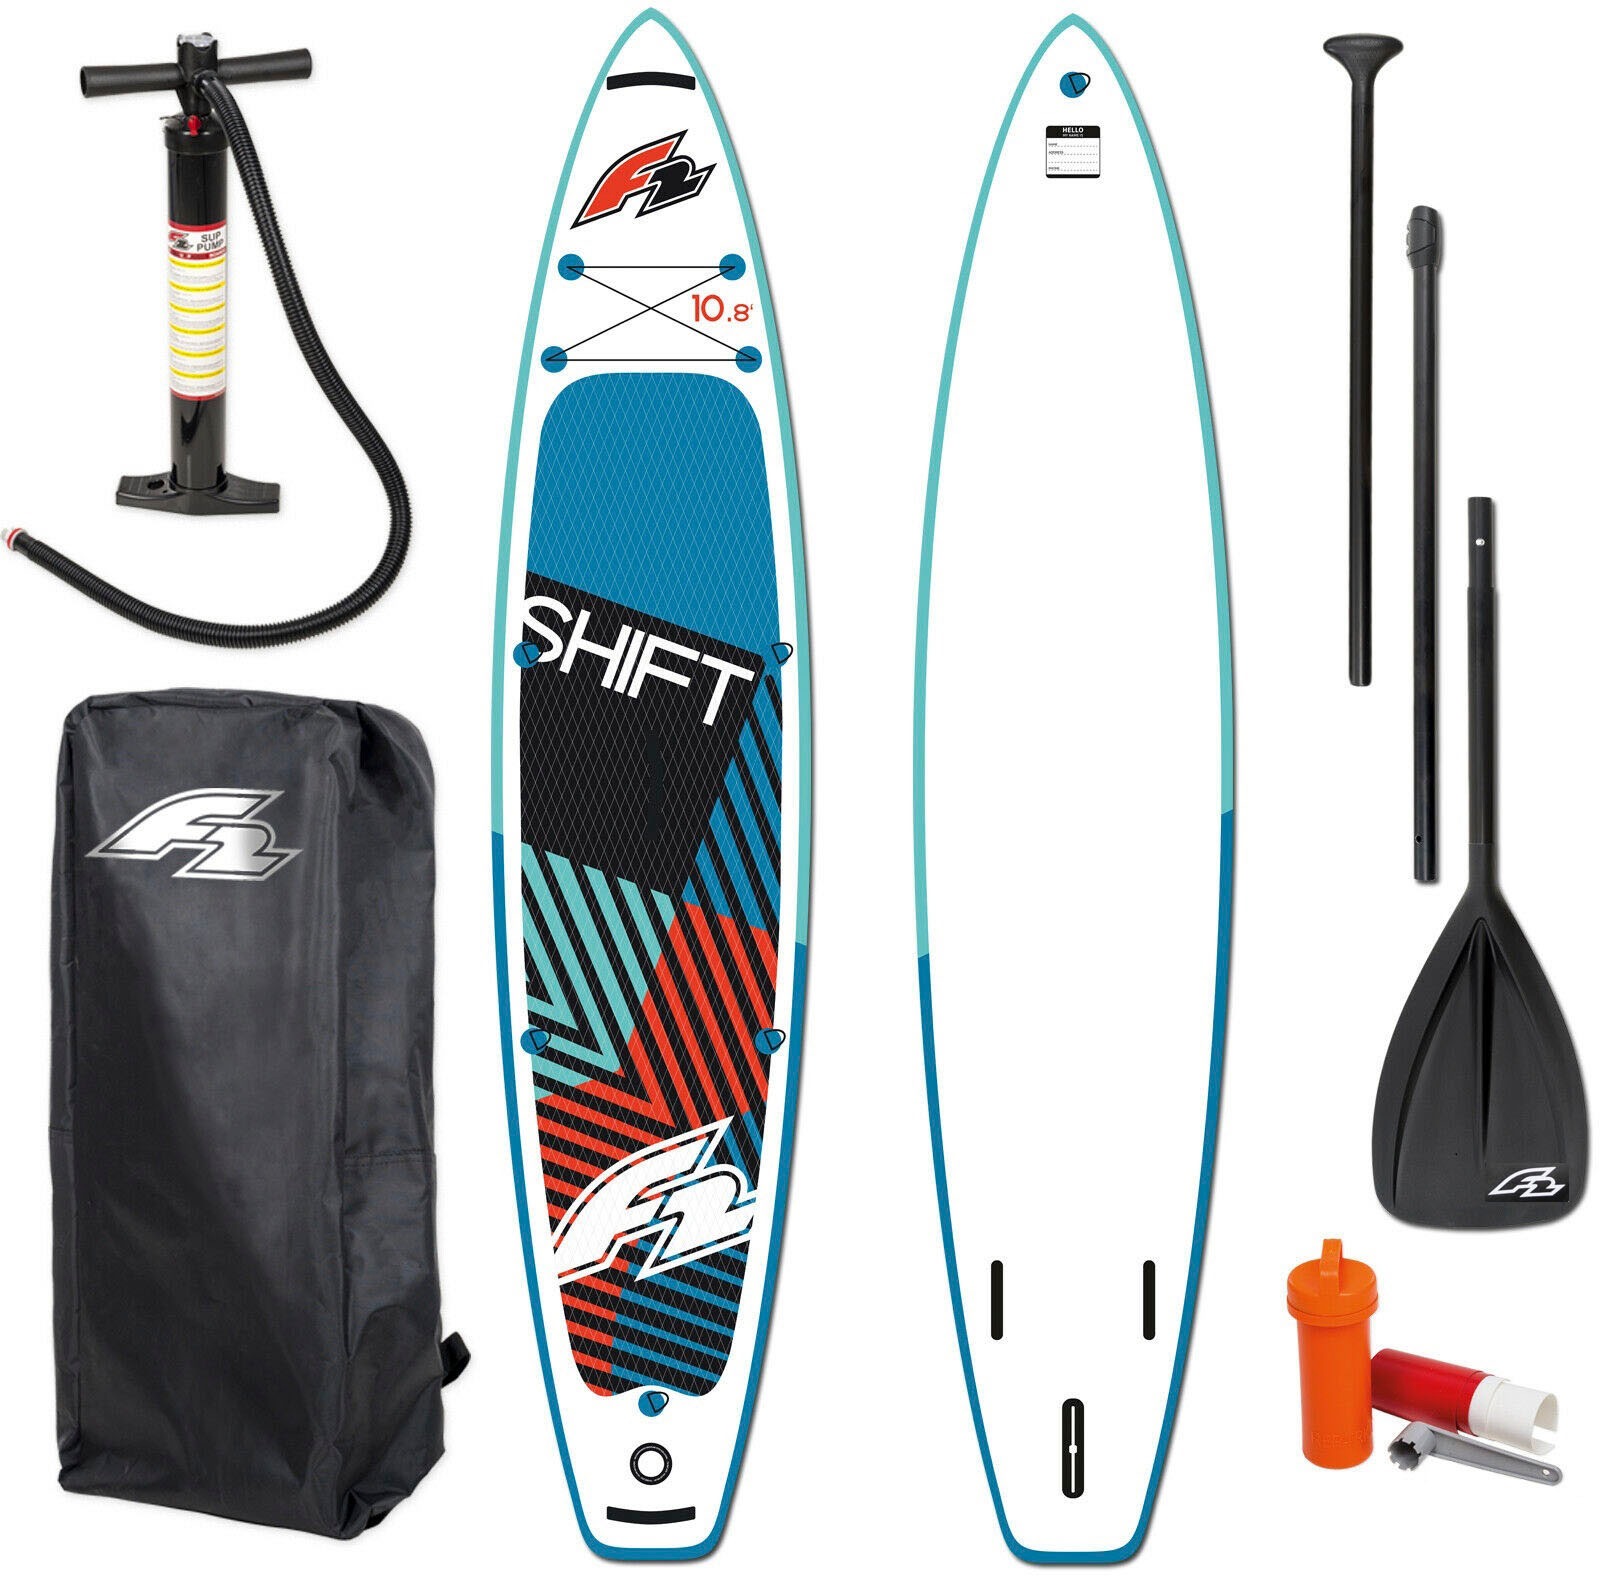 F2 Inflatable SUP-Board »Shift 10,8«, (Packung, 5 tlg.) im OTTO Online Shop